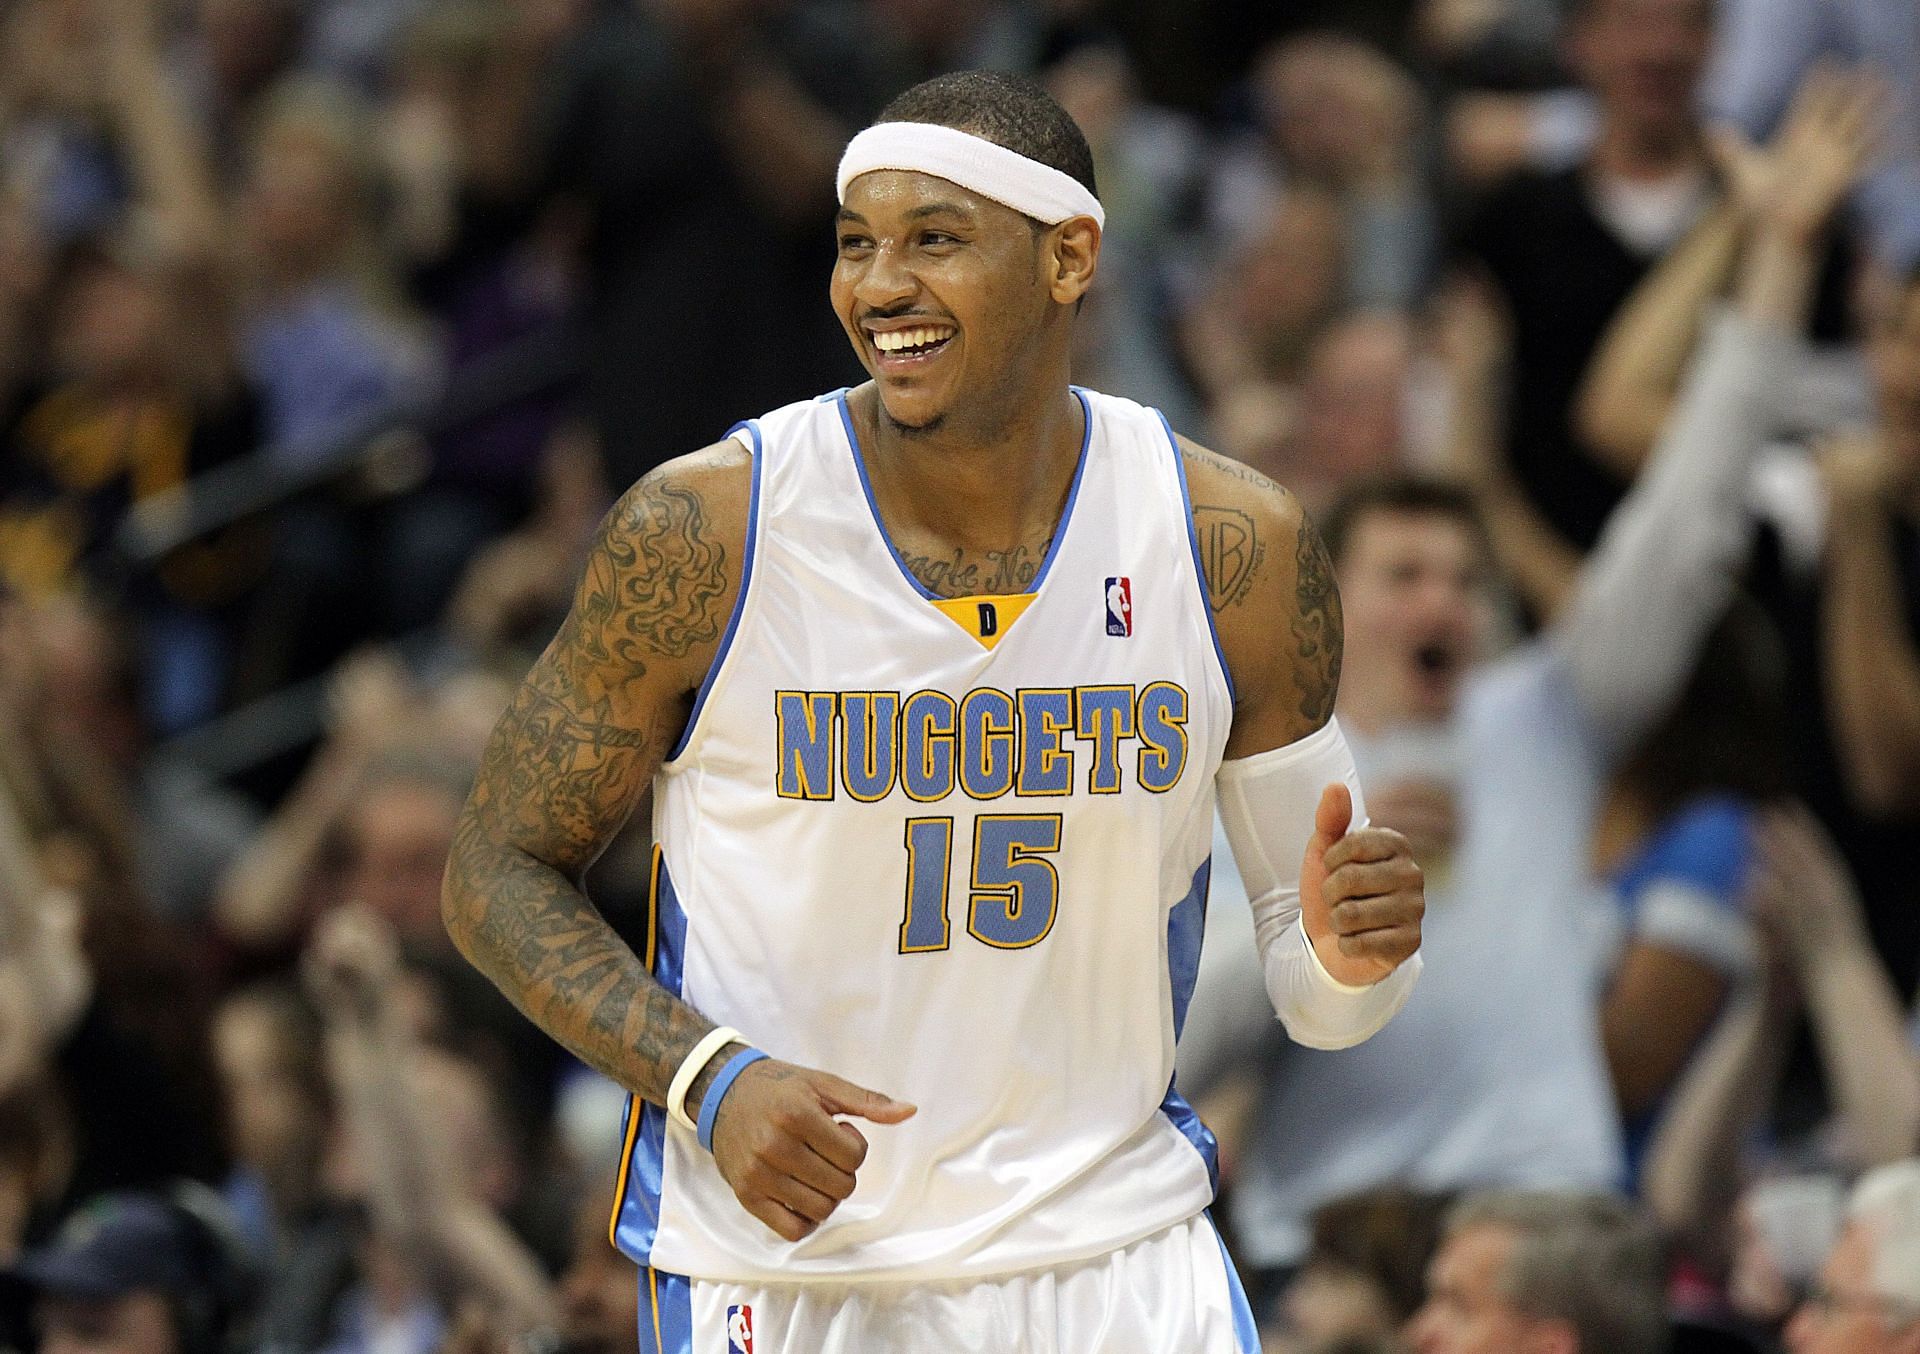 Carmelo Anthony during his time with the Denver Nuggets